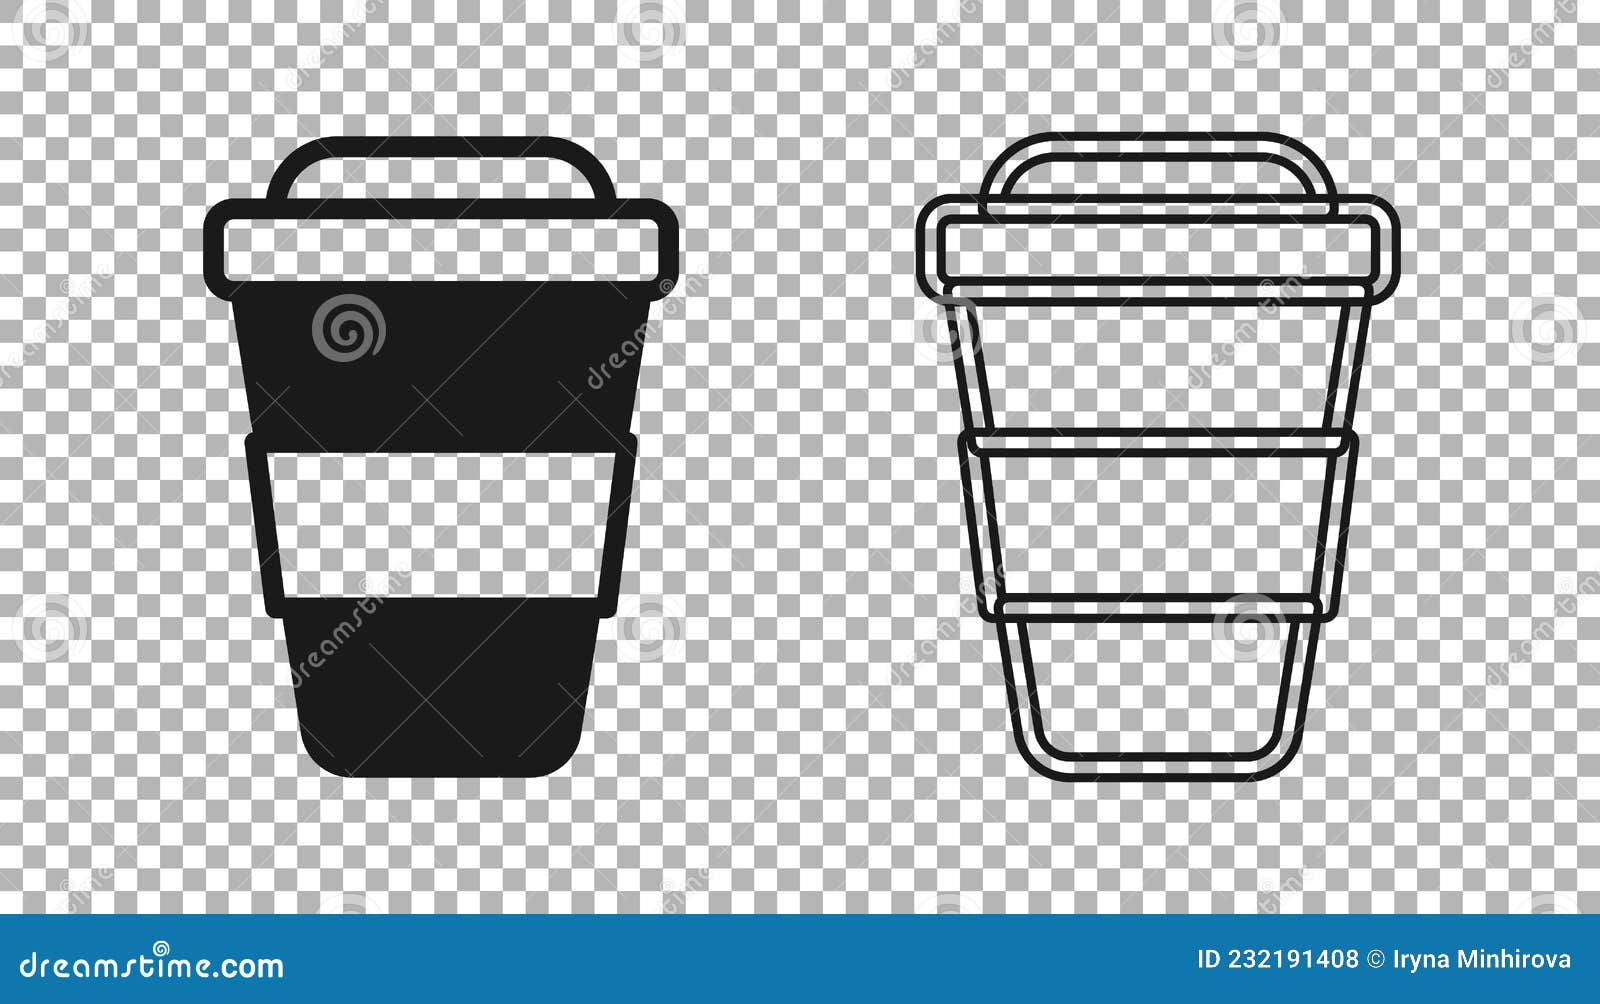 Coffee cup isolated on a transparent background Vector Image